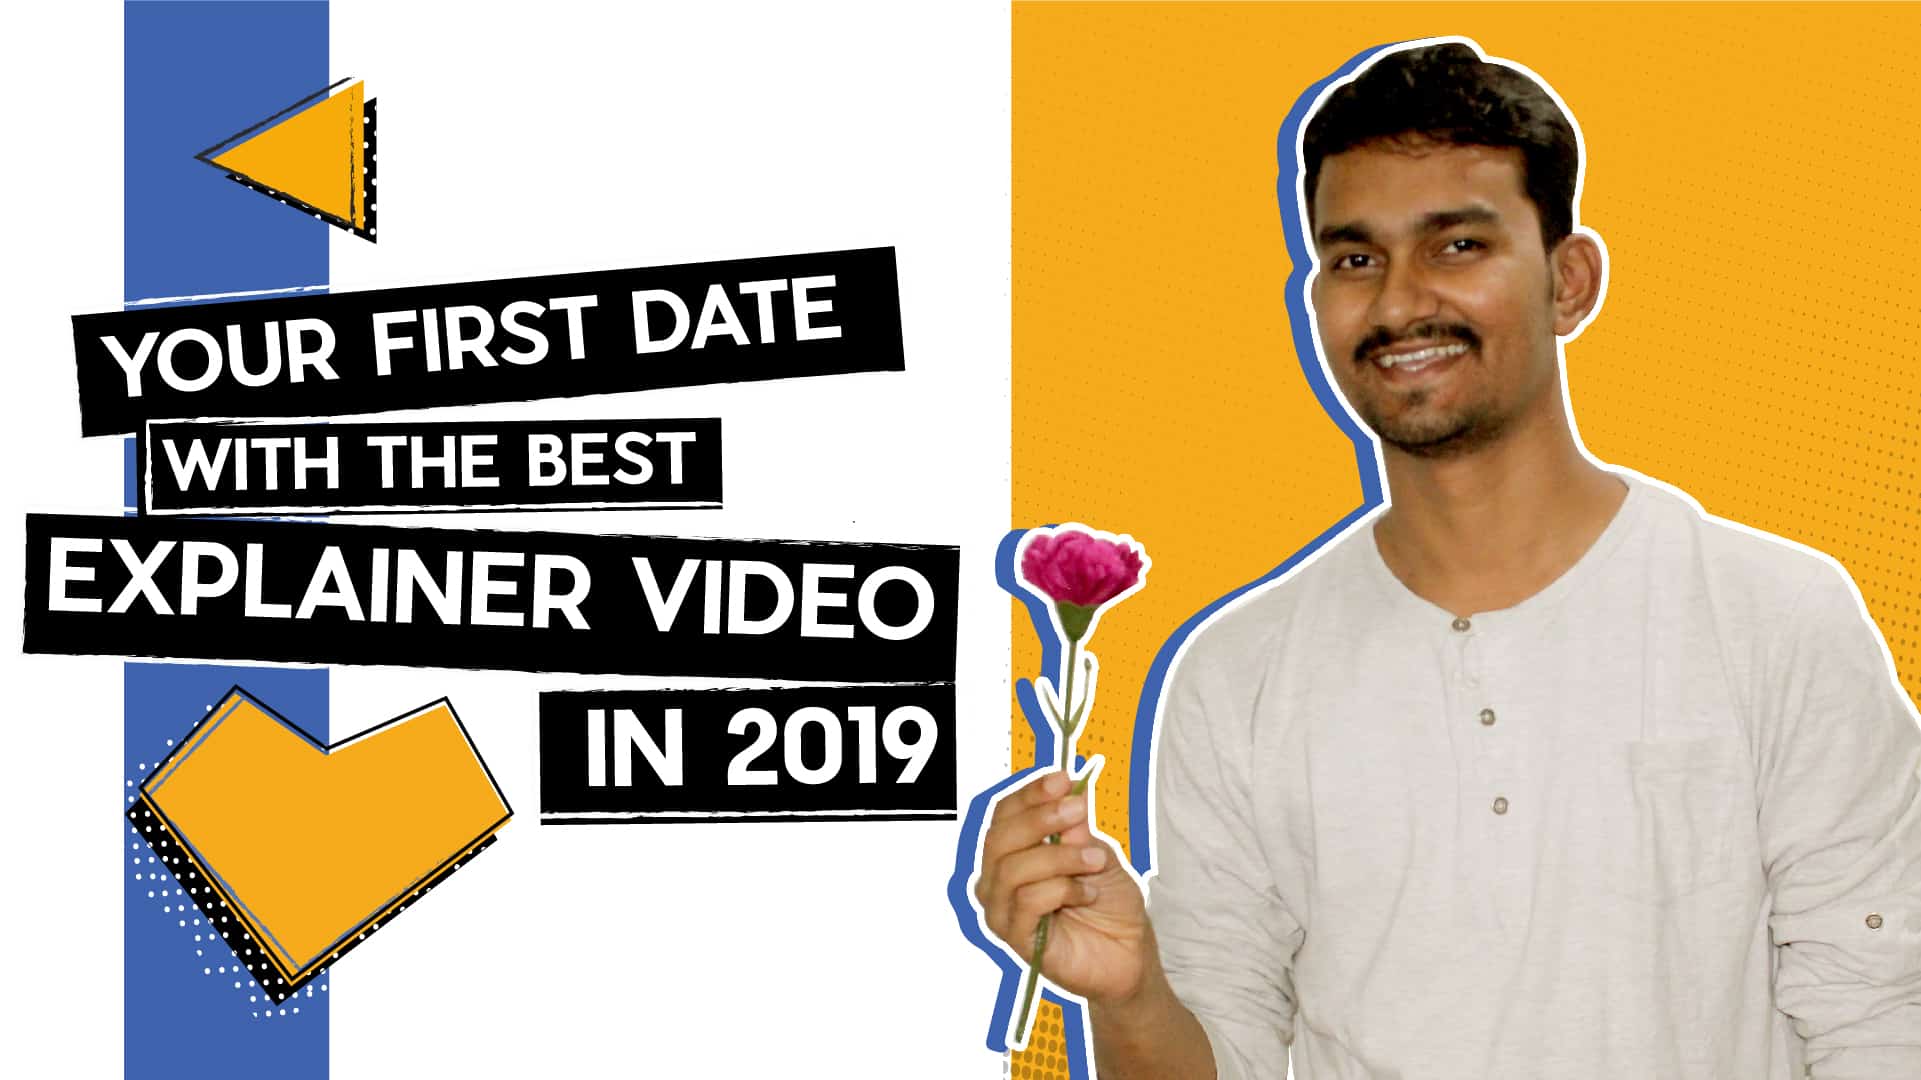 Your first date with the best explainer video in 2019